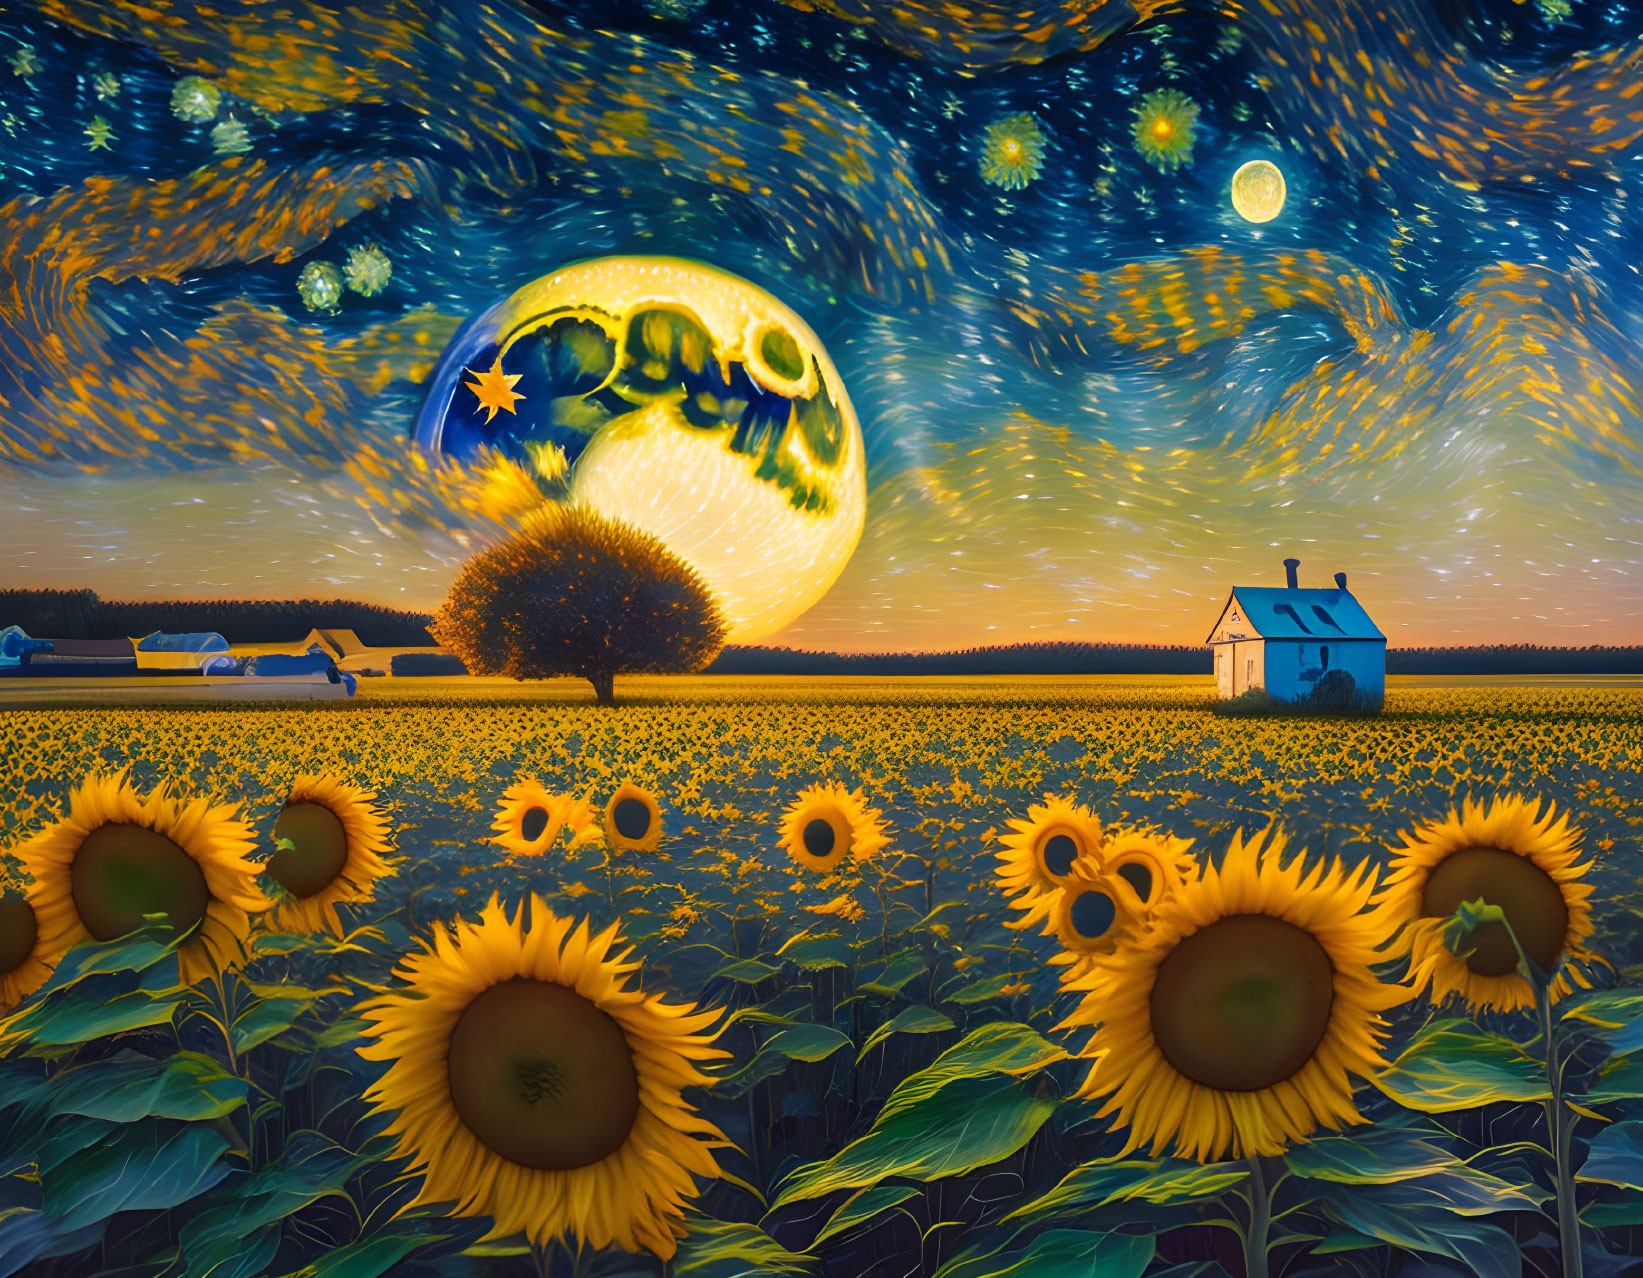 Starry Night Sky Landscape with Sunflowers and Blue House